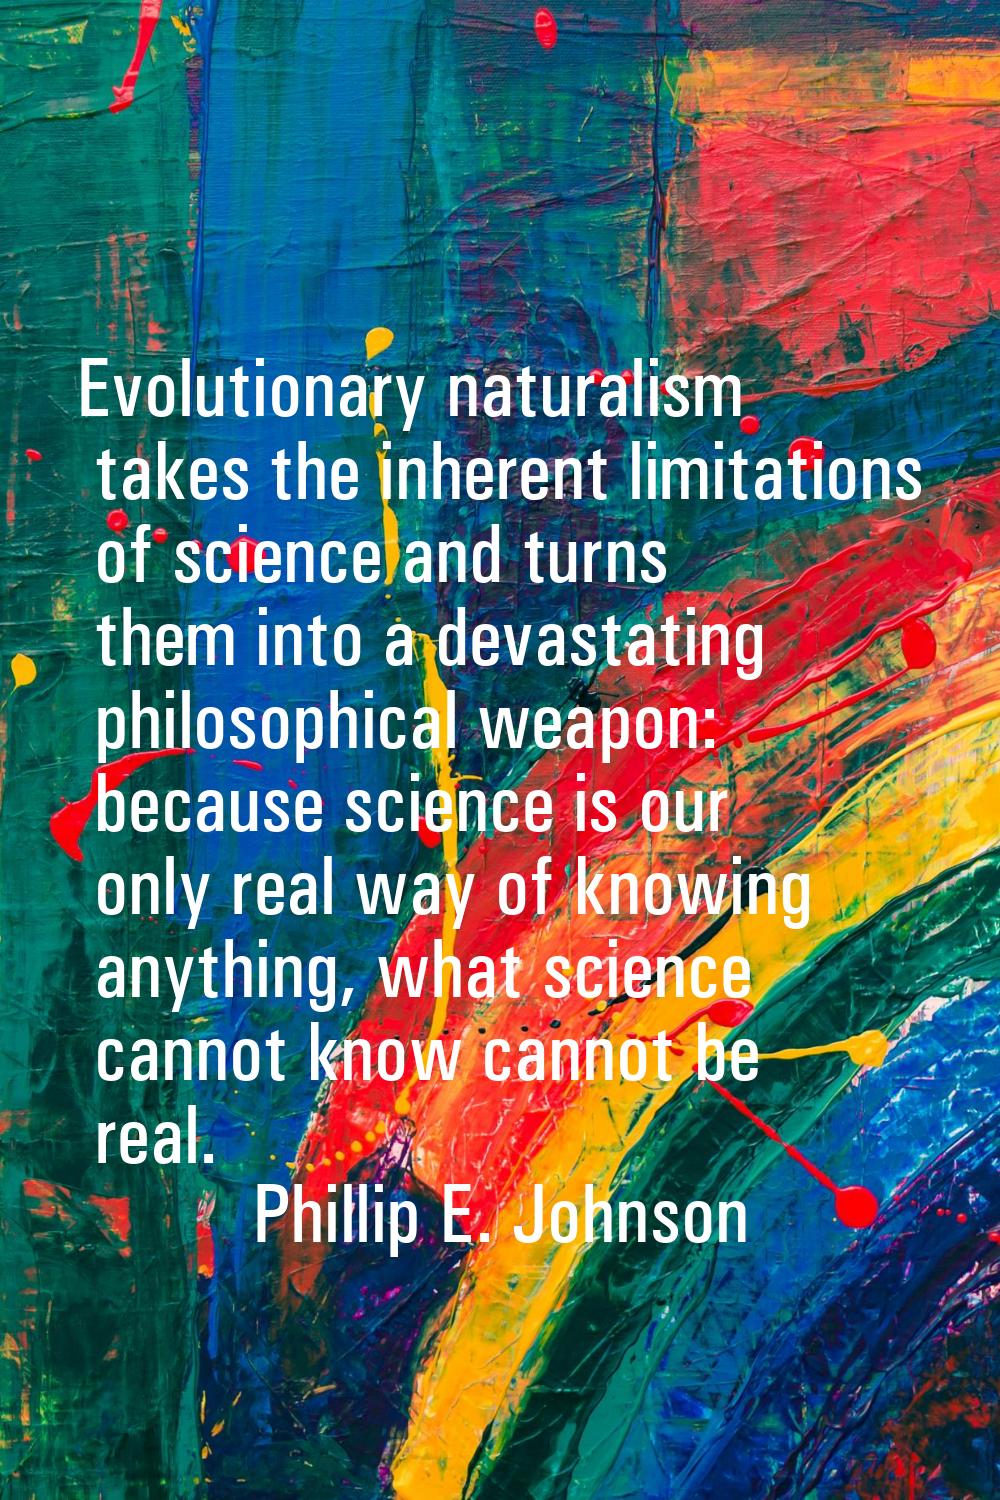 Evolutionary naturalism takes the inherent limitations of science and turns them into a devastating